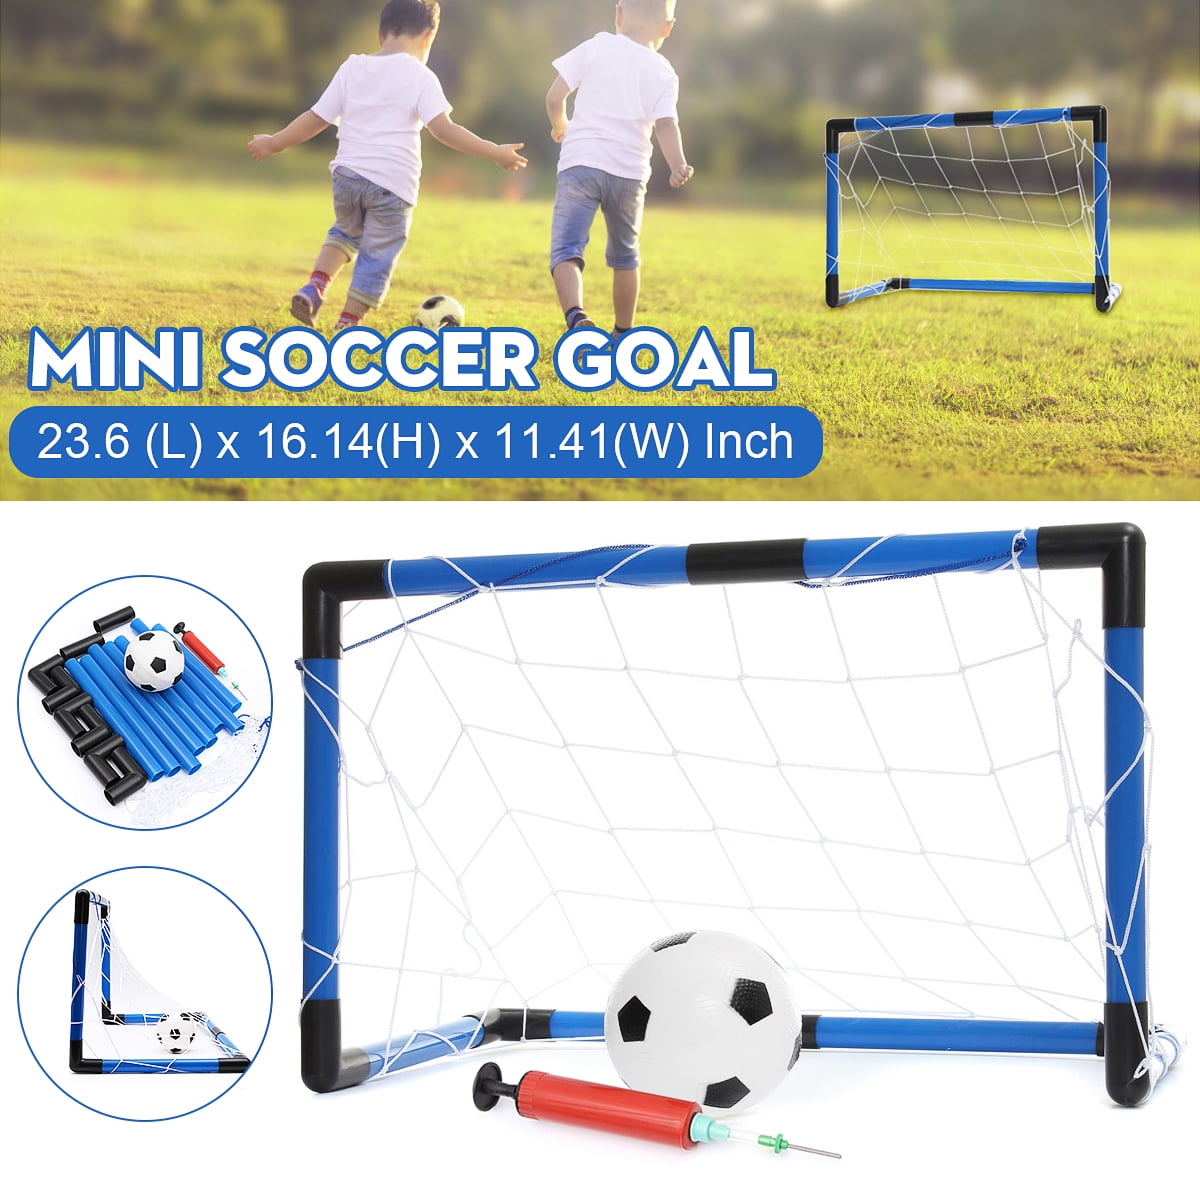 Ultra Portable Football Equipment All Weather Net Kids Youth Teens Adults Practice Sports Soccer Goal HOMCOM 12ft x 4ft Football Goal 